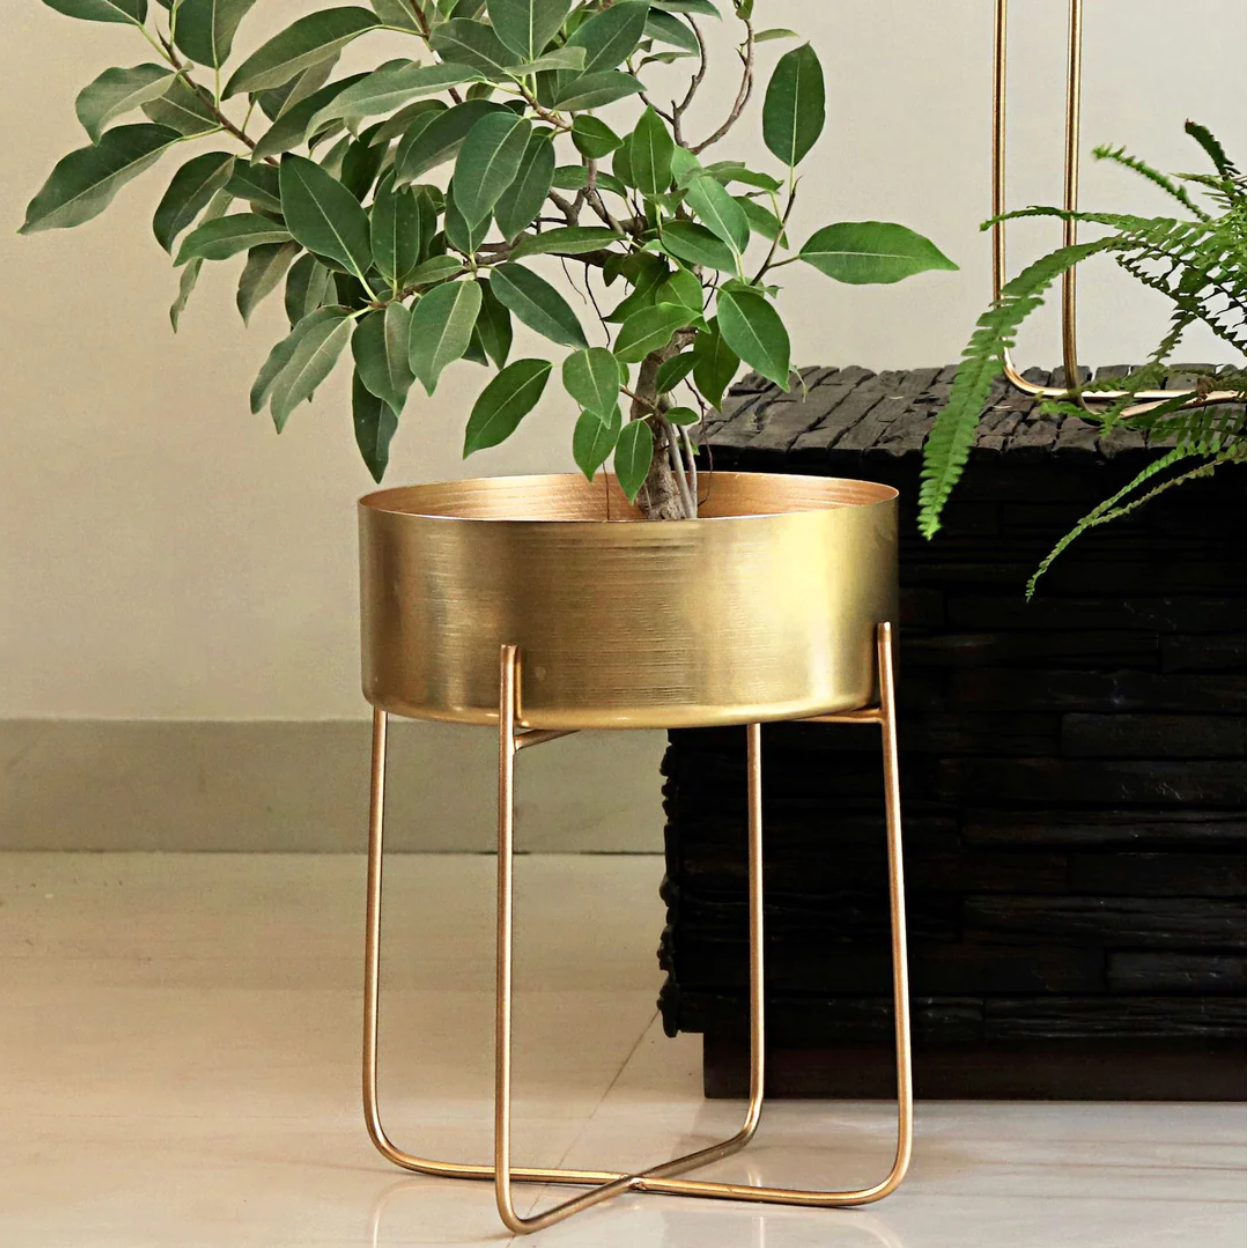 Gold Broad Pots on Stands